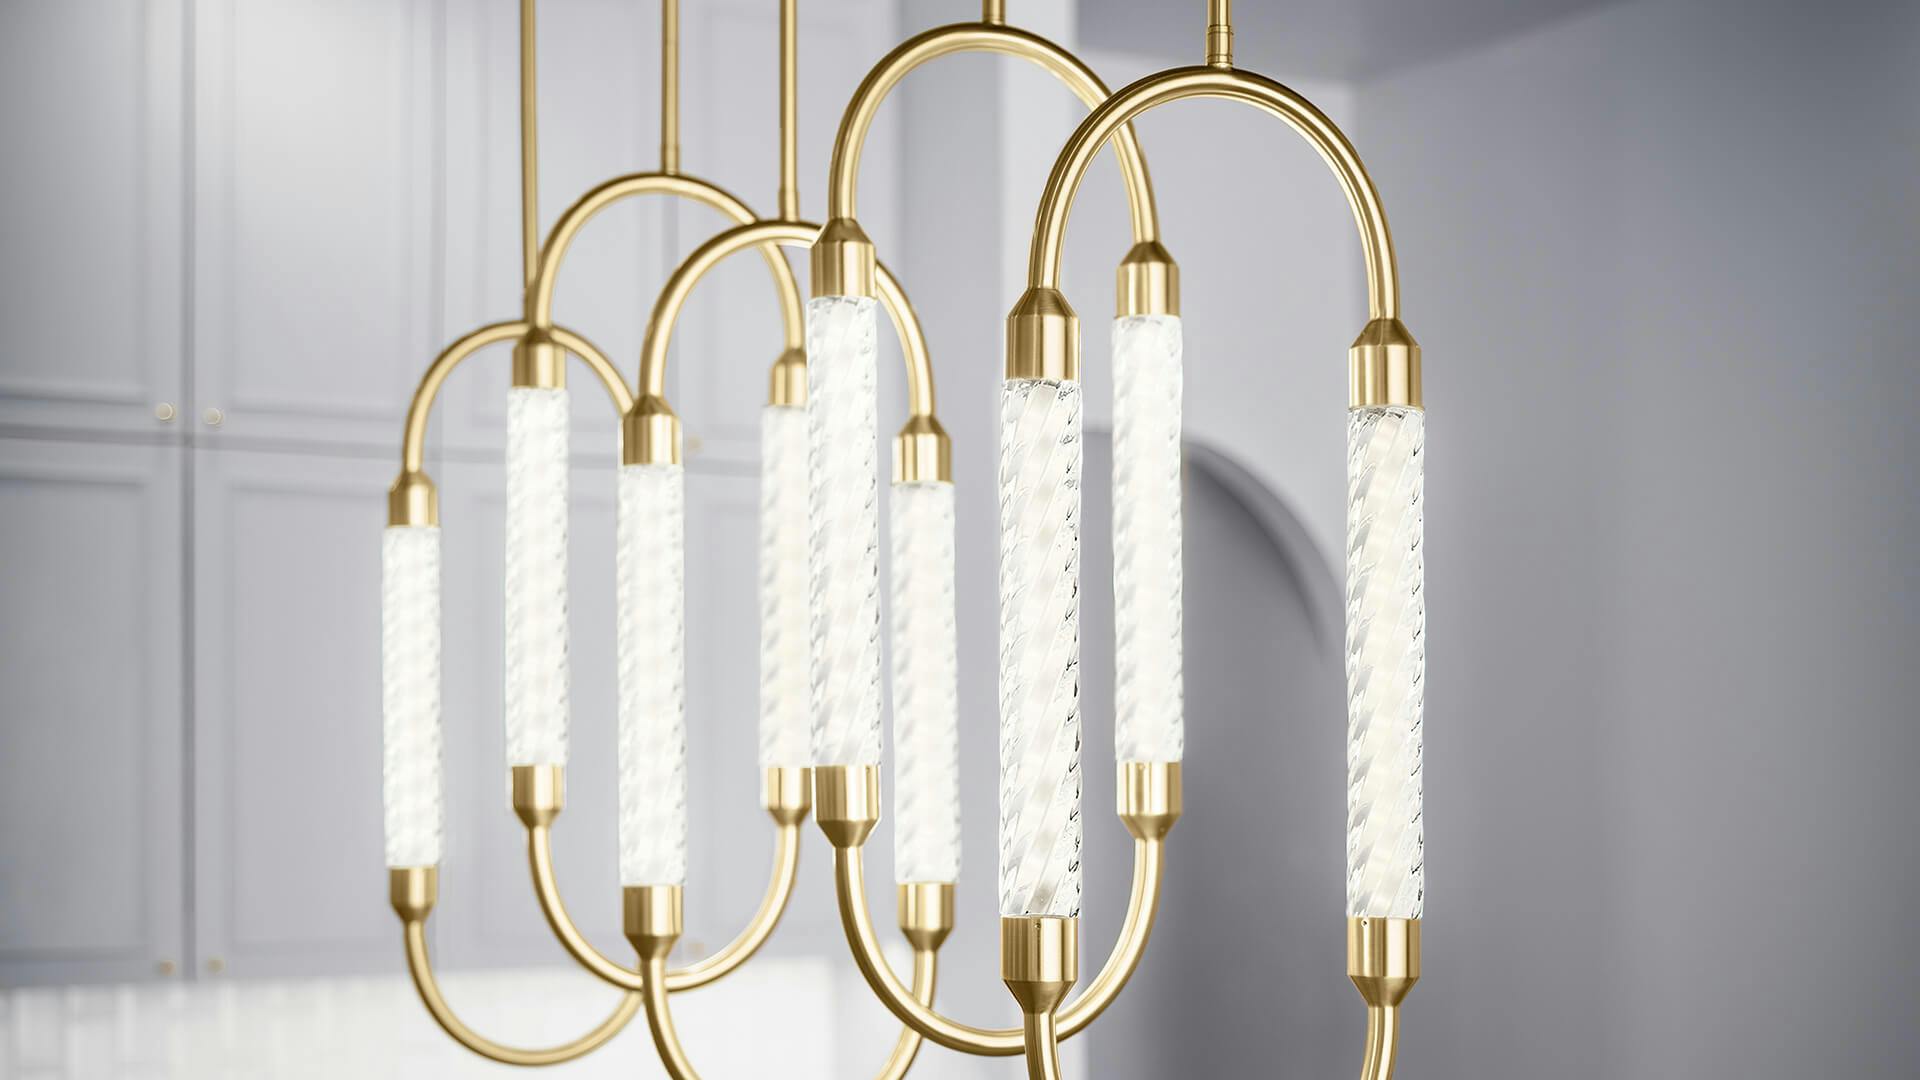 Close up image of a Delsey chandelier in gold finish